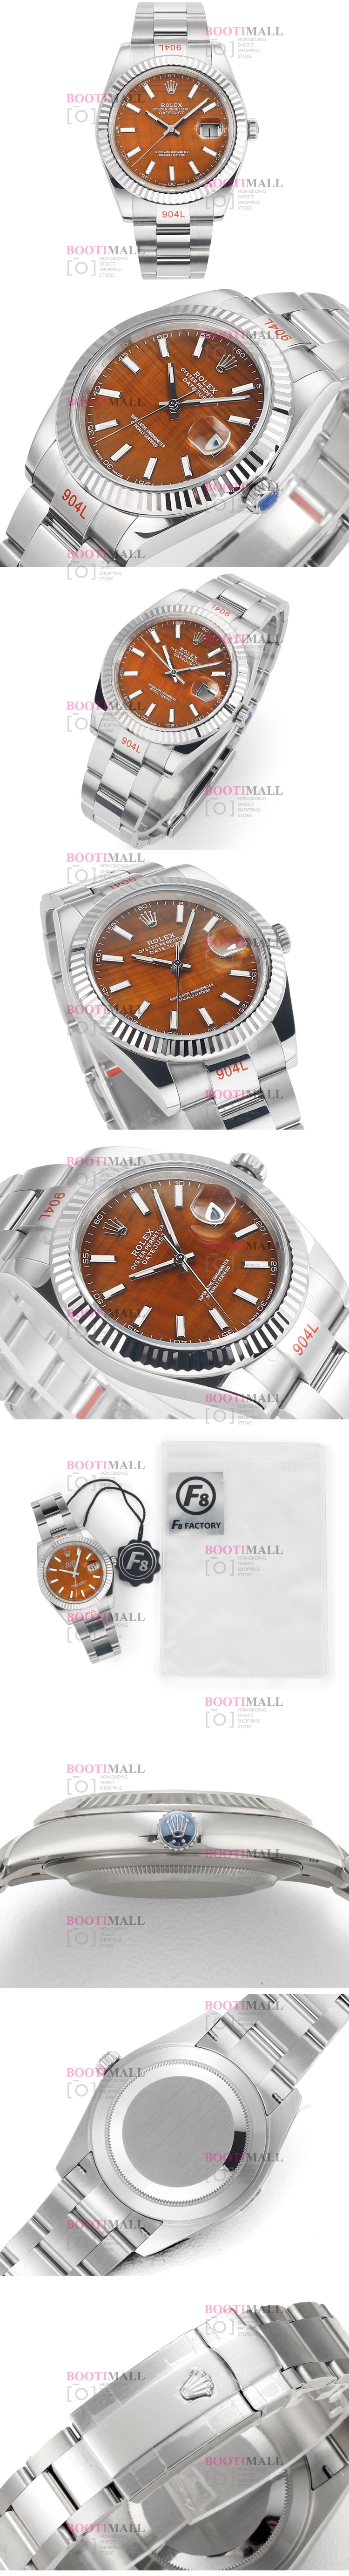 Datejust  Oyster